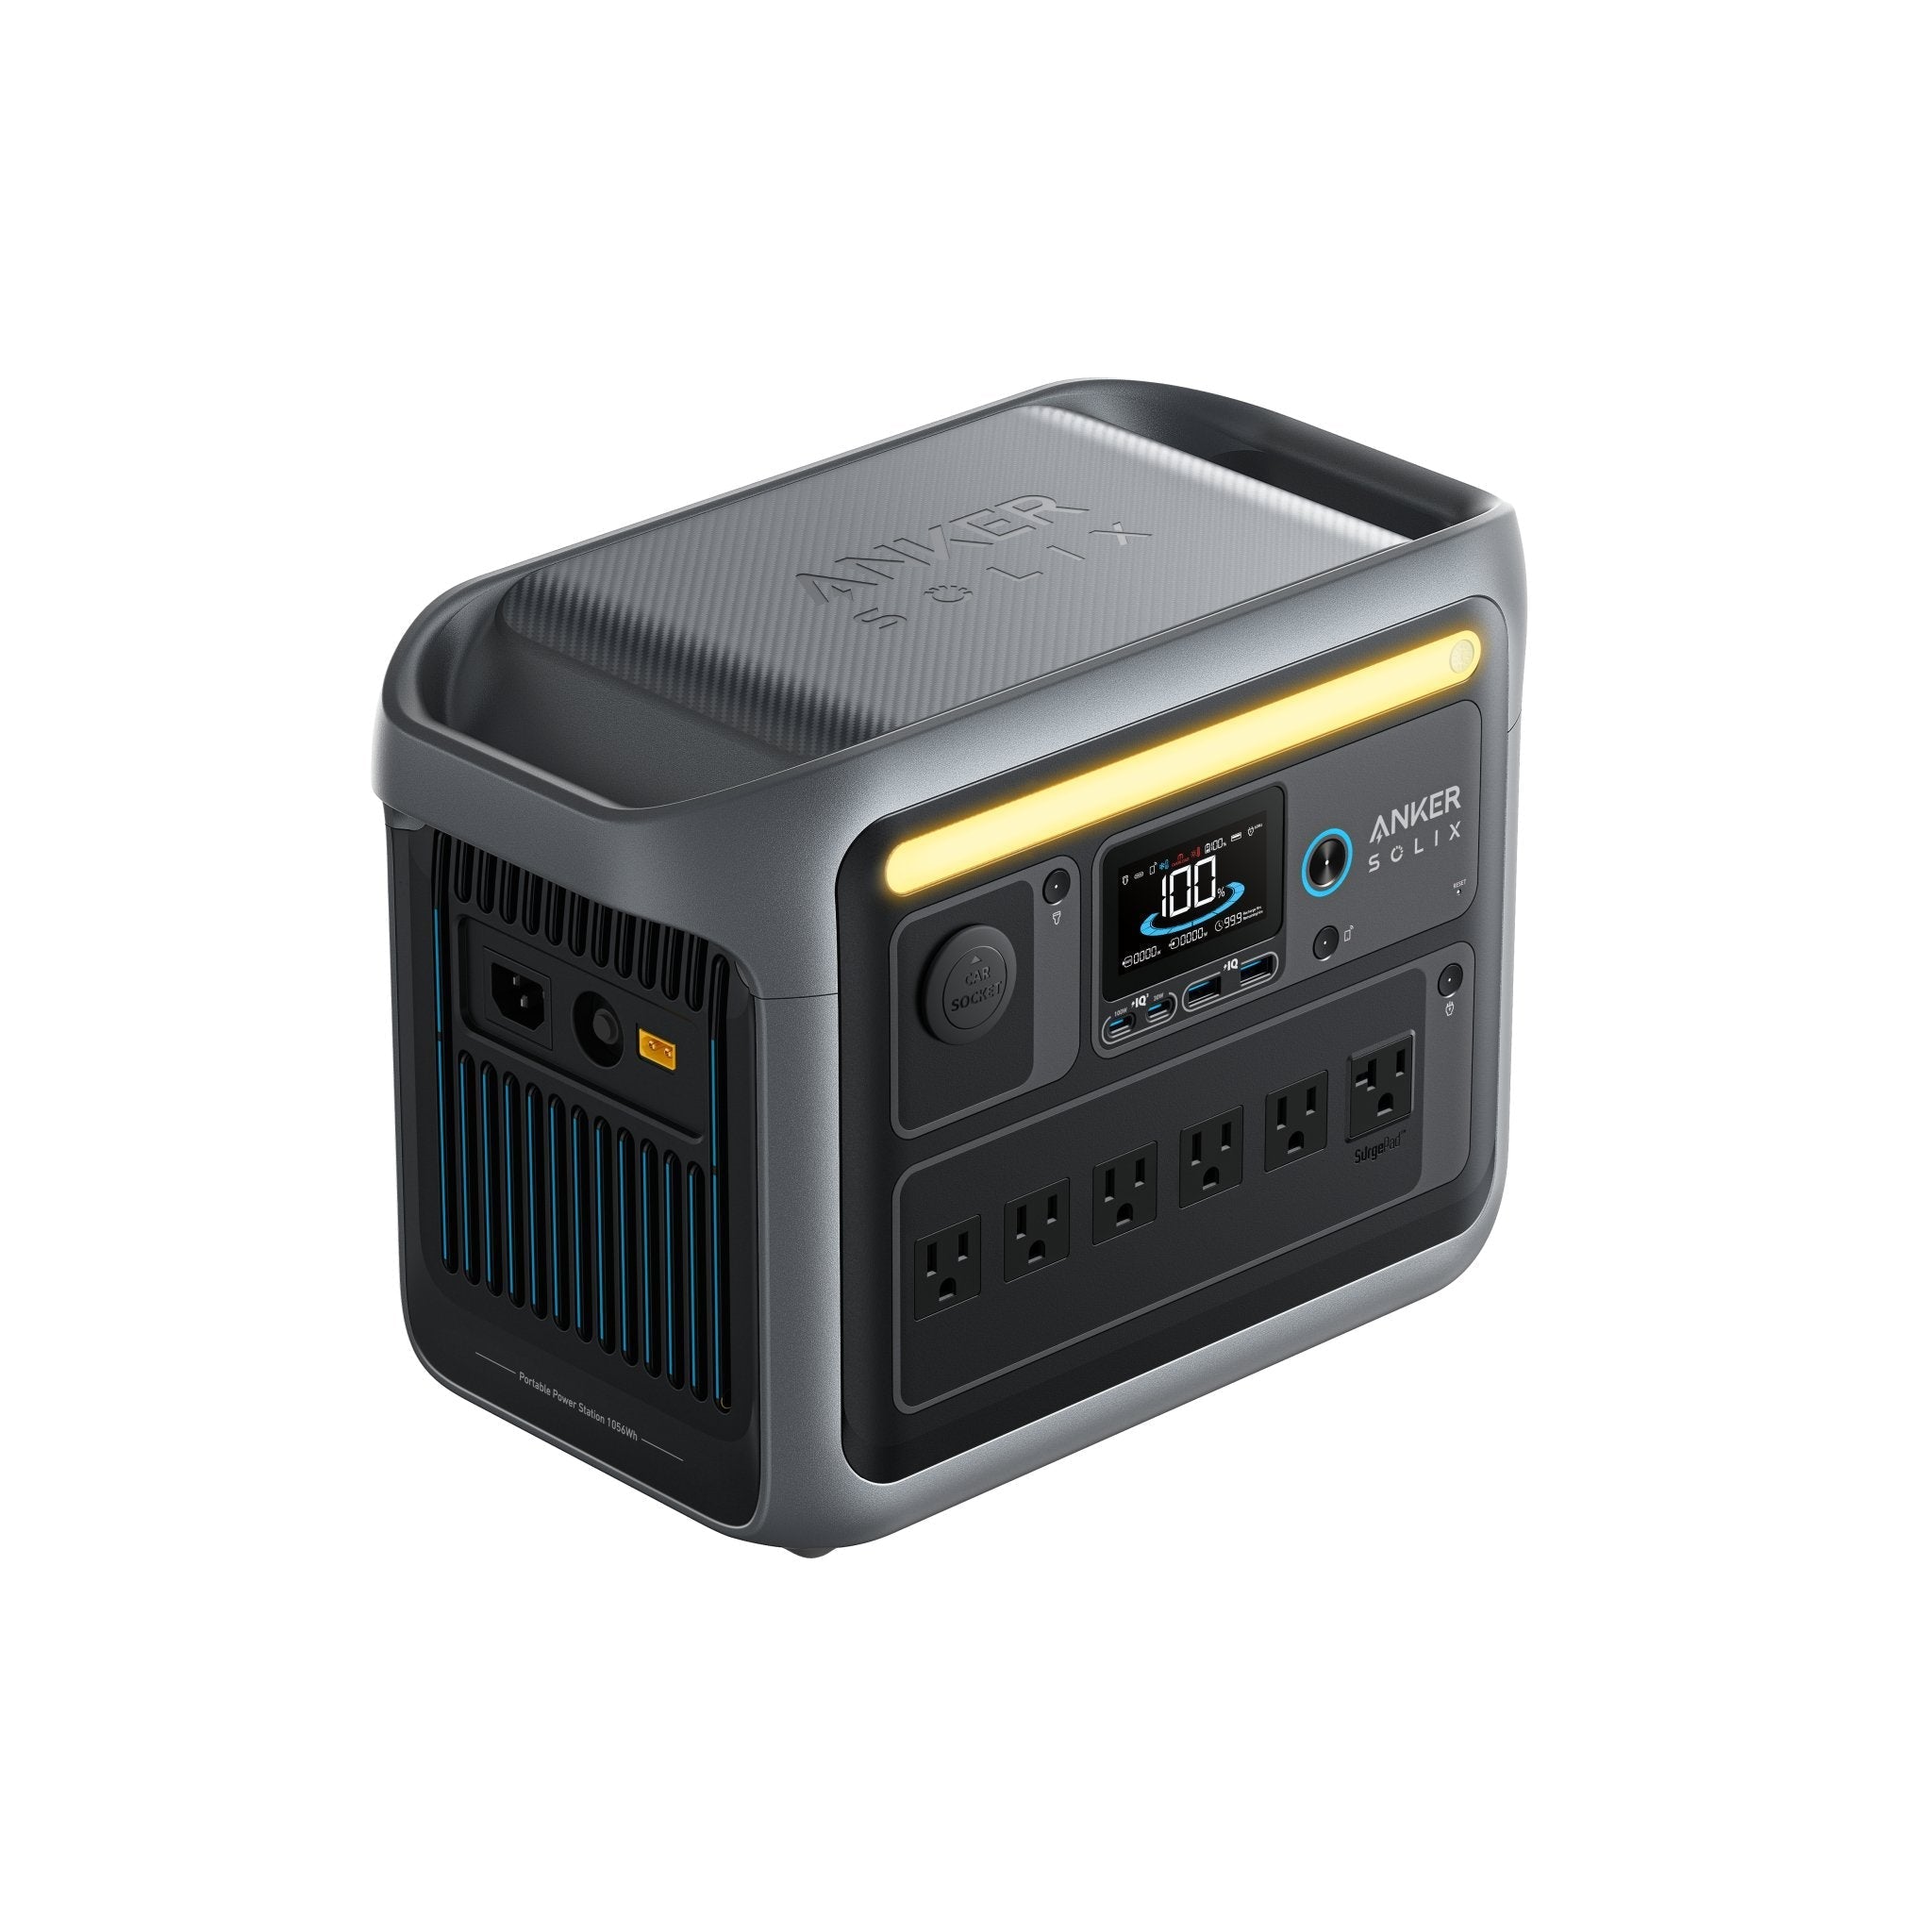 Refurbished Anker SOLIX C1000 Portable Power Station - 1056Wh | 1800W - Solar Generators and Power Stations Plus